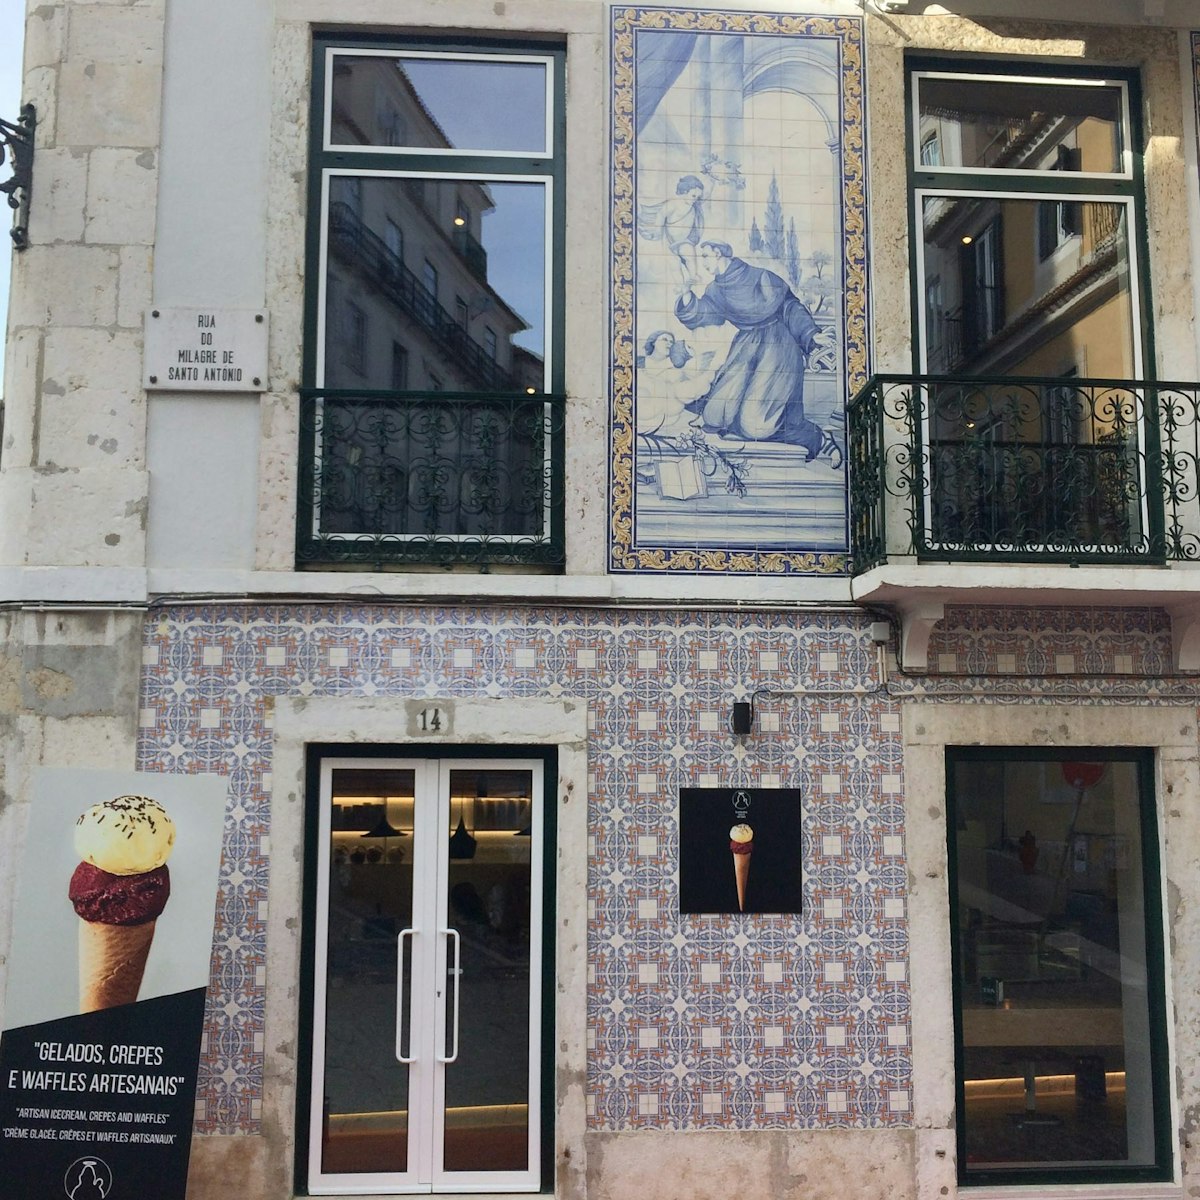 Power your climb uphill to Castelo de São Jorge with a coffee and pastel de nata at this new cafe in Lisbon